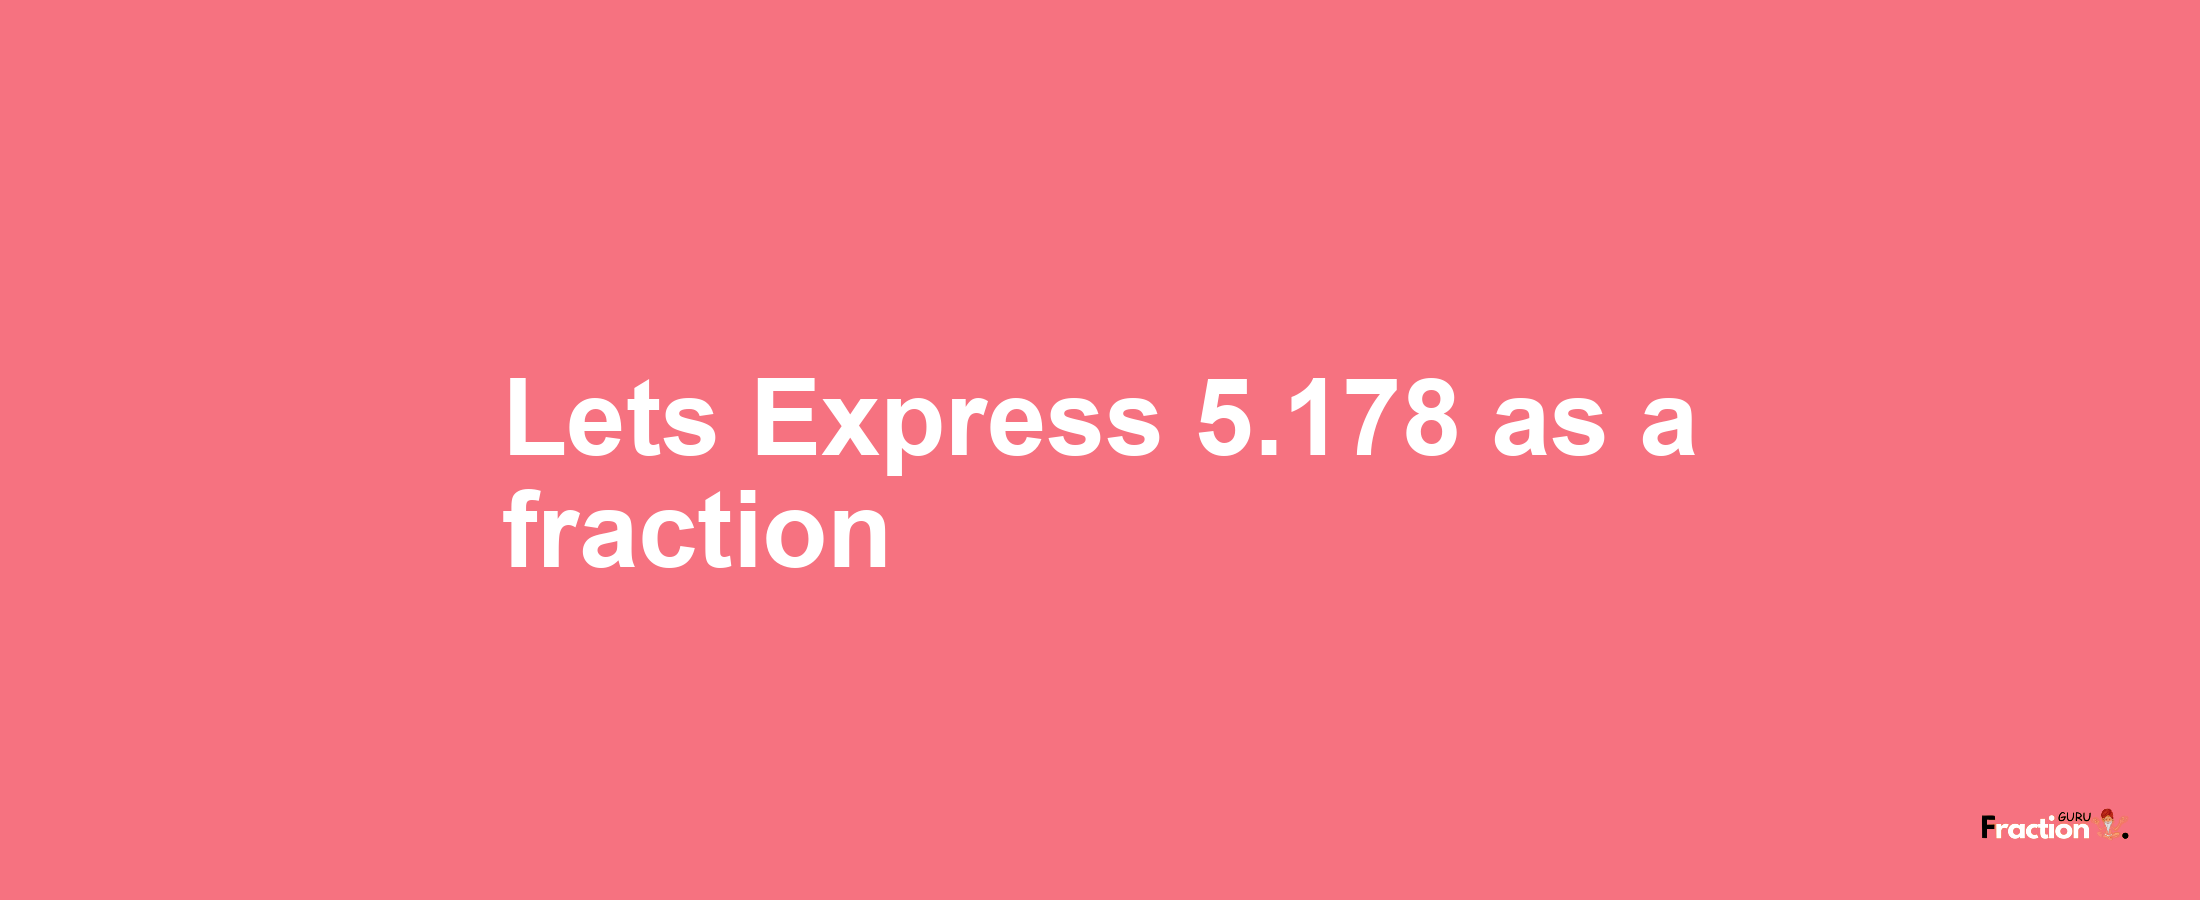 Lets Express 5.178 as afraction